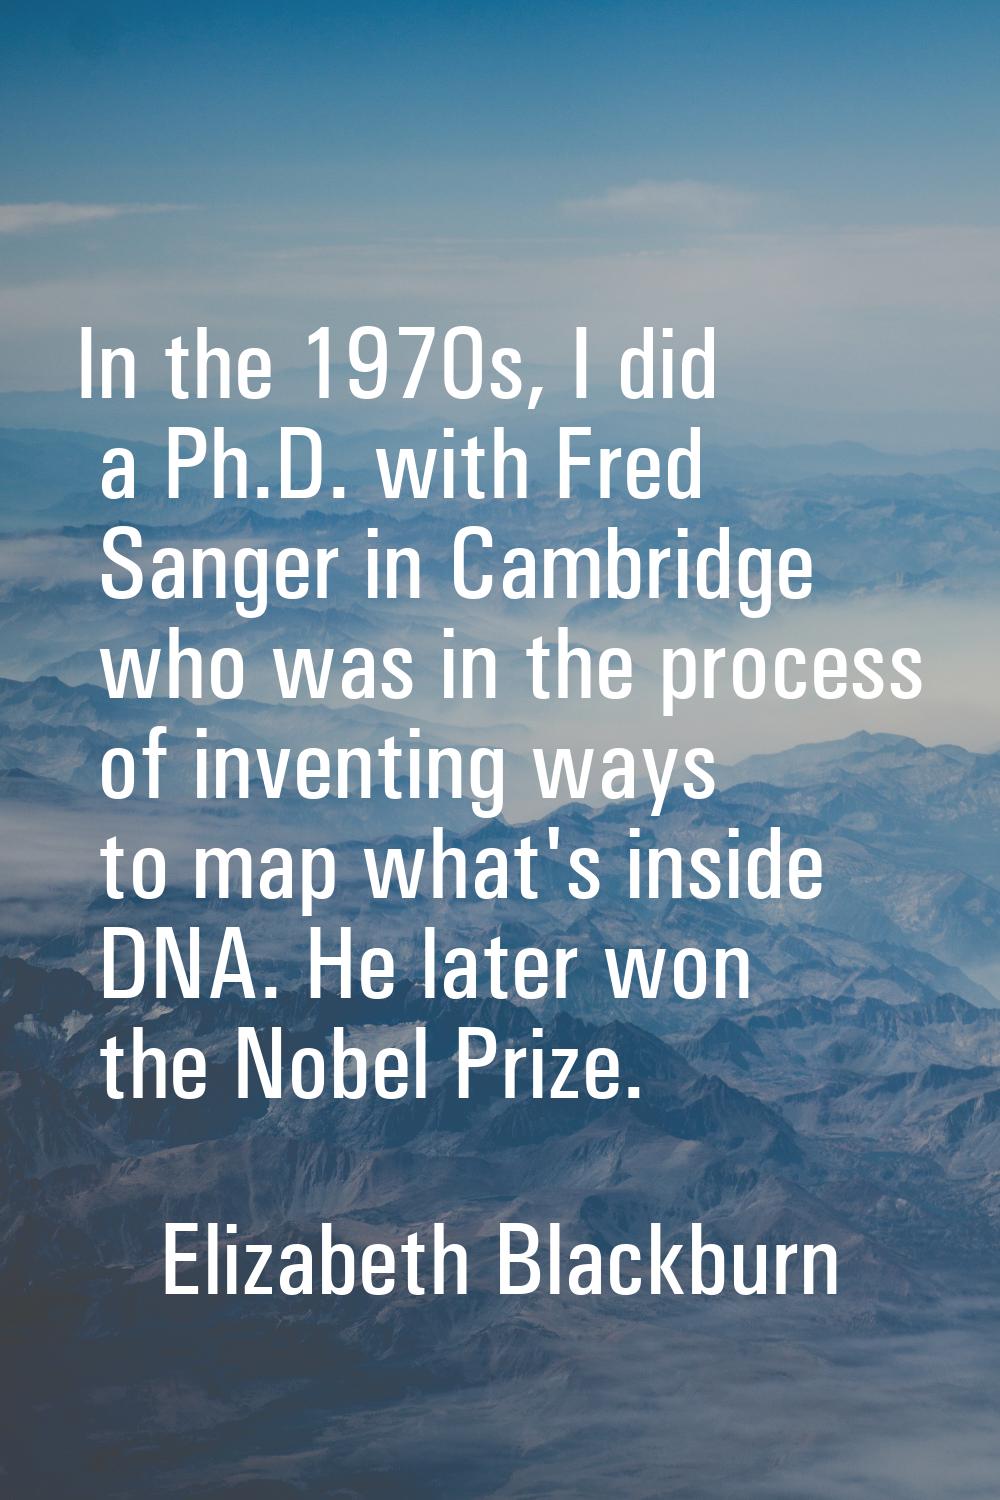 In the 1970s, I did a Ph.D. with Fred Sanger in Cambridge who was in the process of inventing ways 